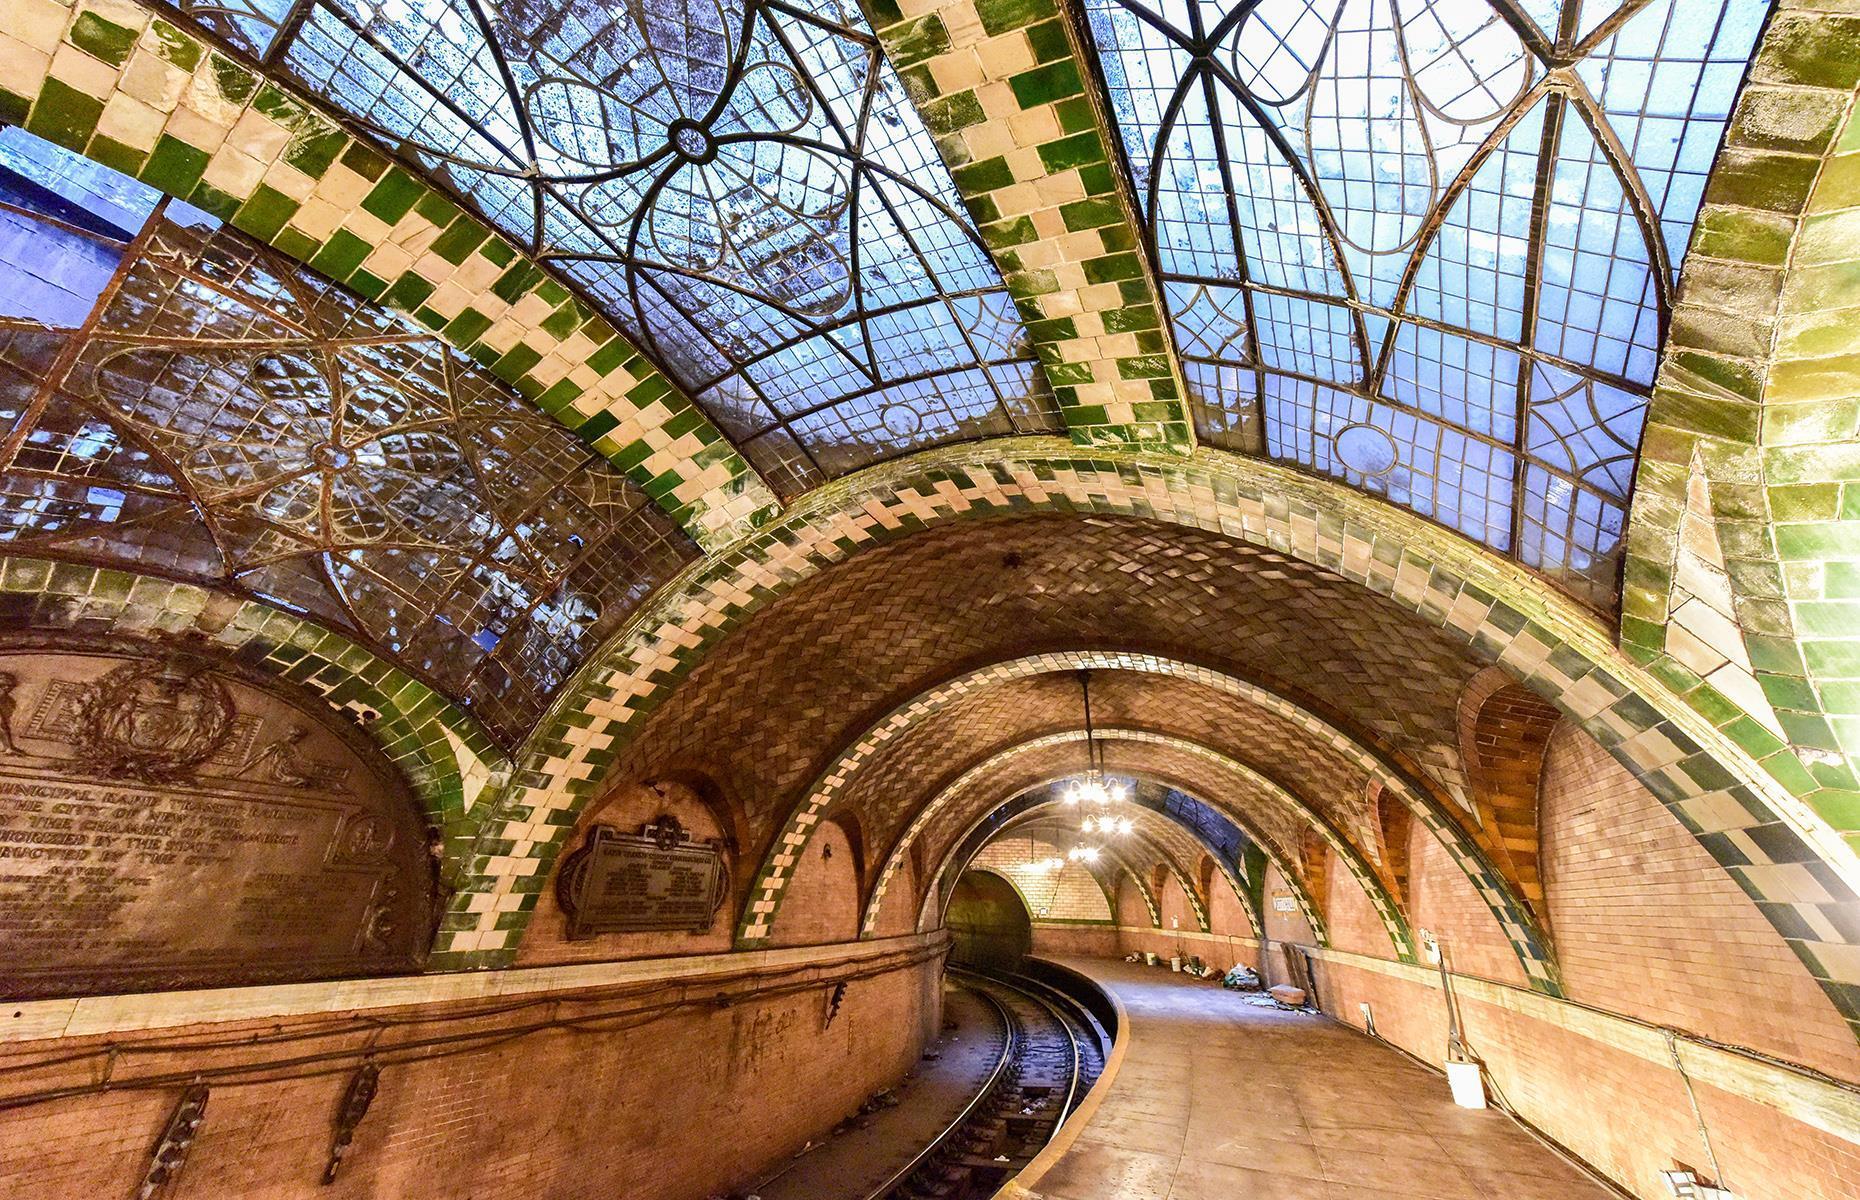 <p>Opened in 1904, beautiful City Hall is much more elaborate than today's subway stations, with its vaulted ceiling and patterned glass. But, despite its architectural beauty, the station wasn't quite fit for purpose. Its curved platform design meant that it couldn't accommodate the longer, modern trains that took to tracks in the 20th century. It was closed in 1945 and <a href="https://www.nytransitmuseum.org/oldcityhall/">the New York Transit Museum</a> typically run tours today – availability may be altered due to COVID-19. </p>